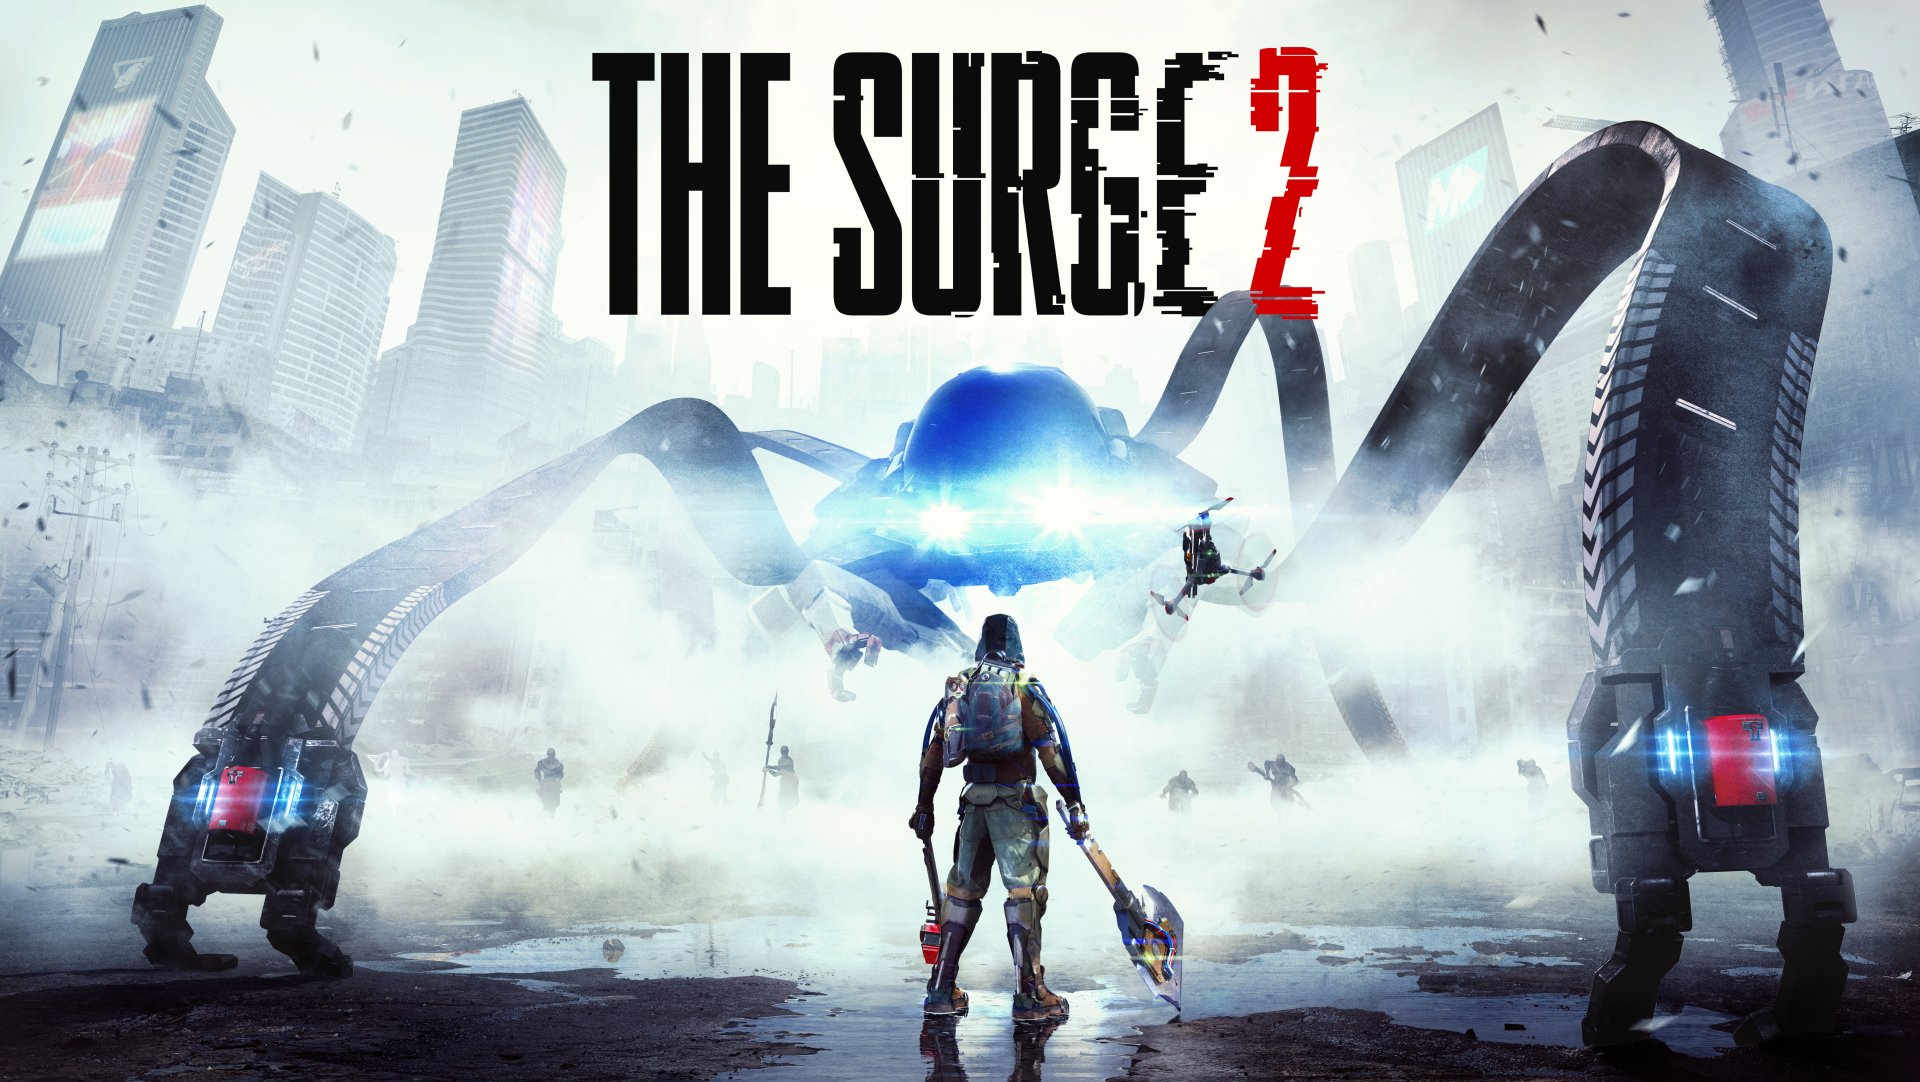 21 The Surge 2 HD Wallpapers | Background Images - Wallpaper Abyss